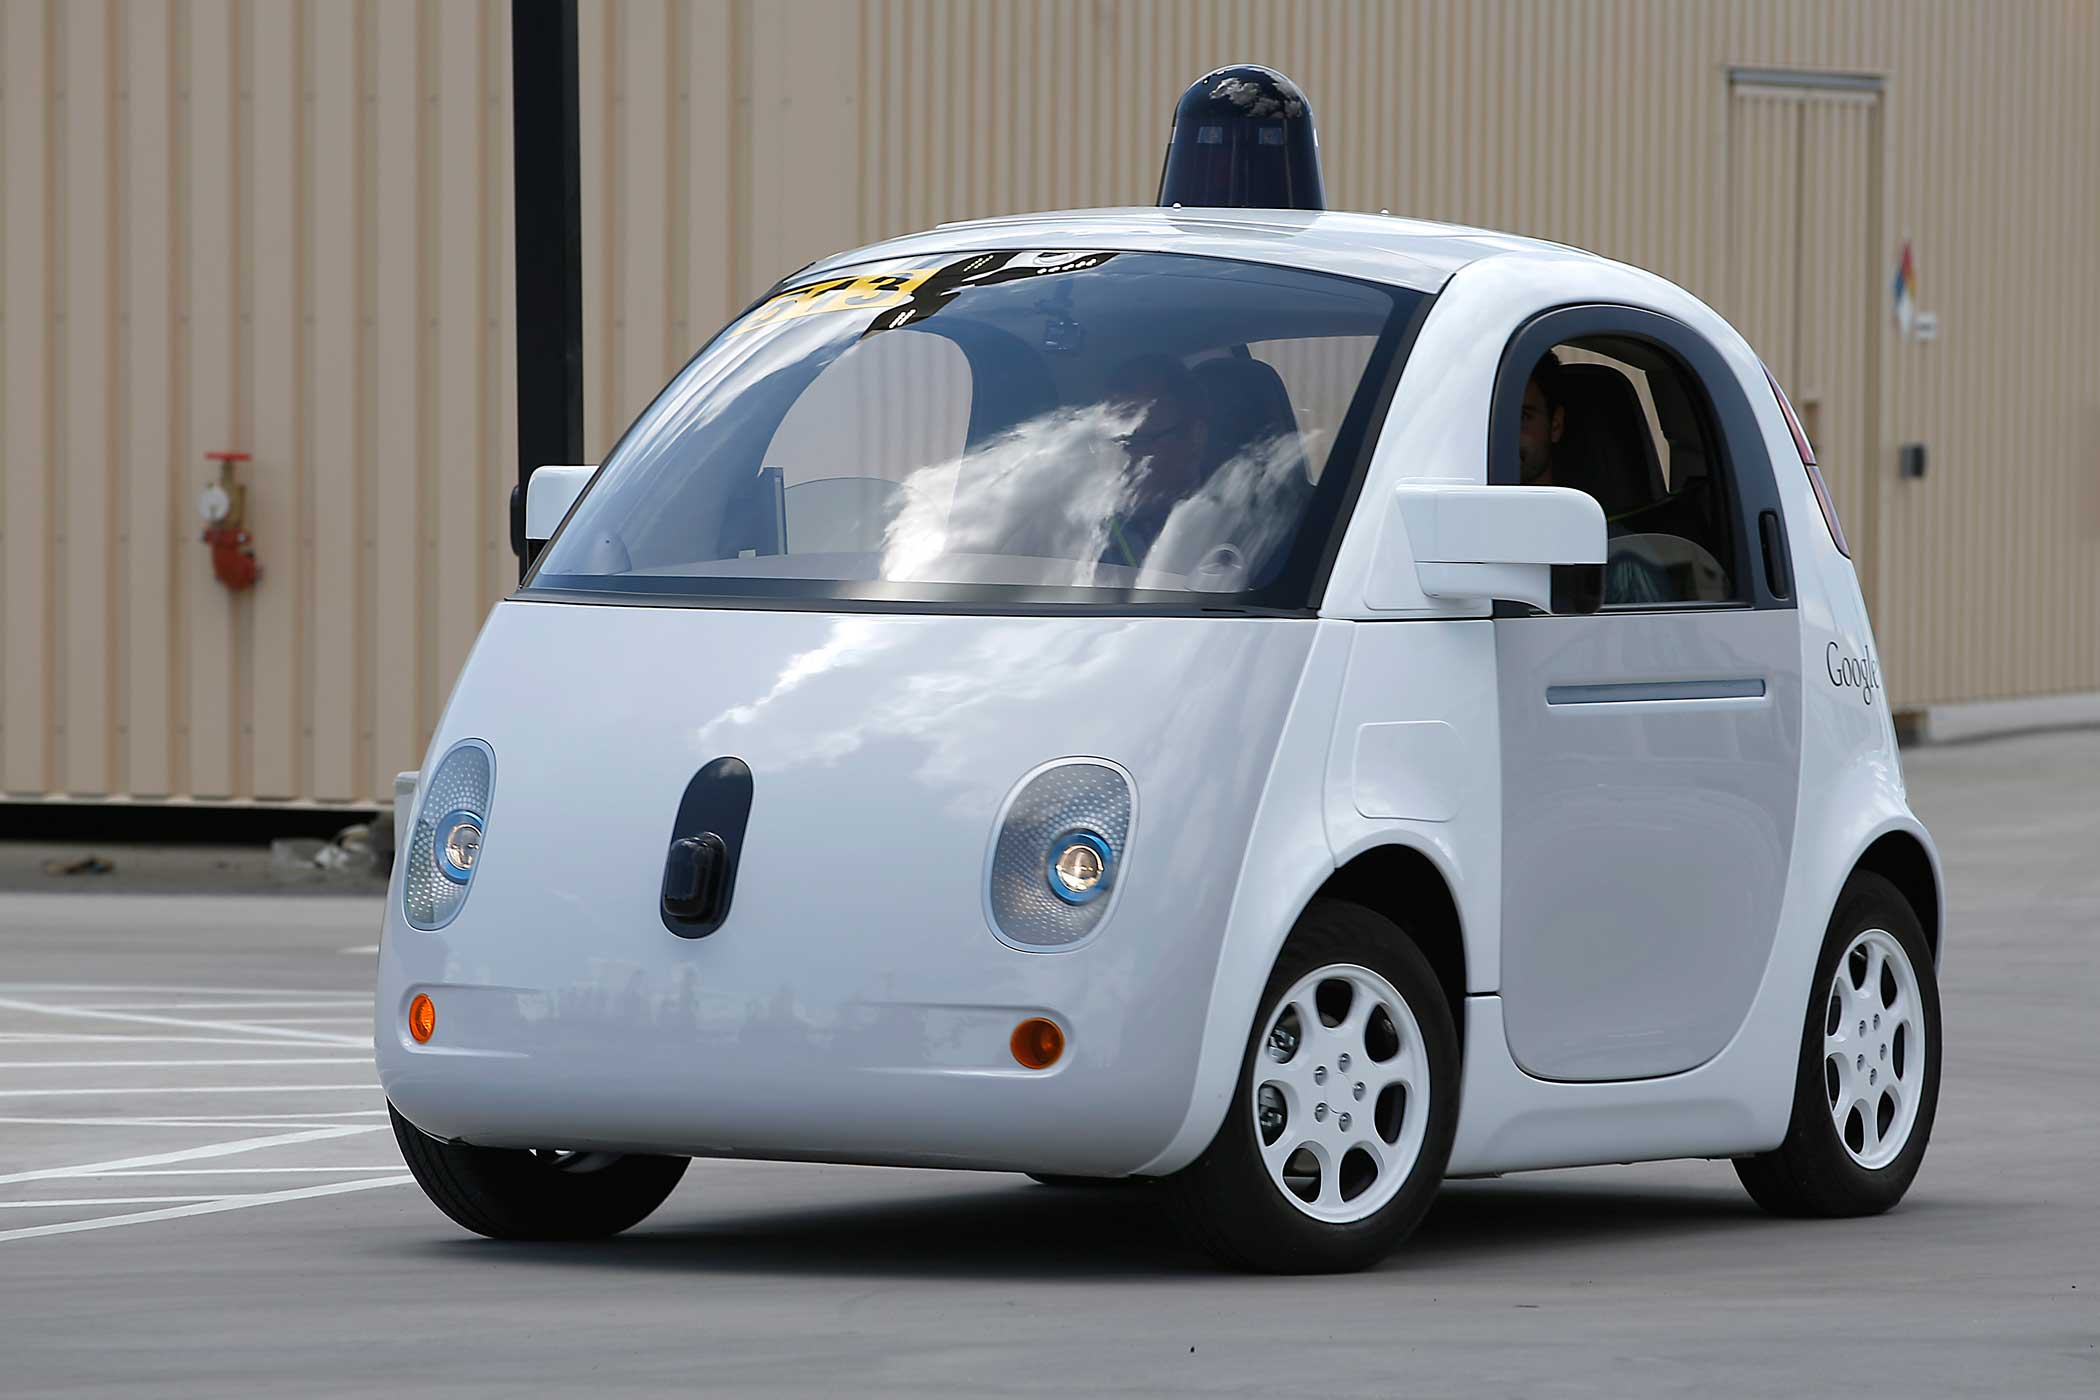 Google's new self-driving prototype car drives around a parking lot during a demonstration at Google campus on May 13, 2015, in Mountain View, Calif.